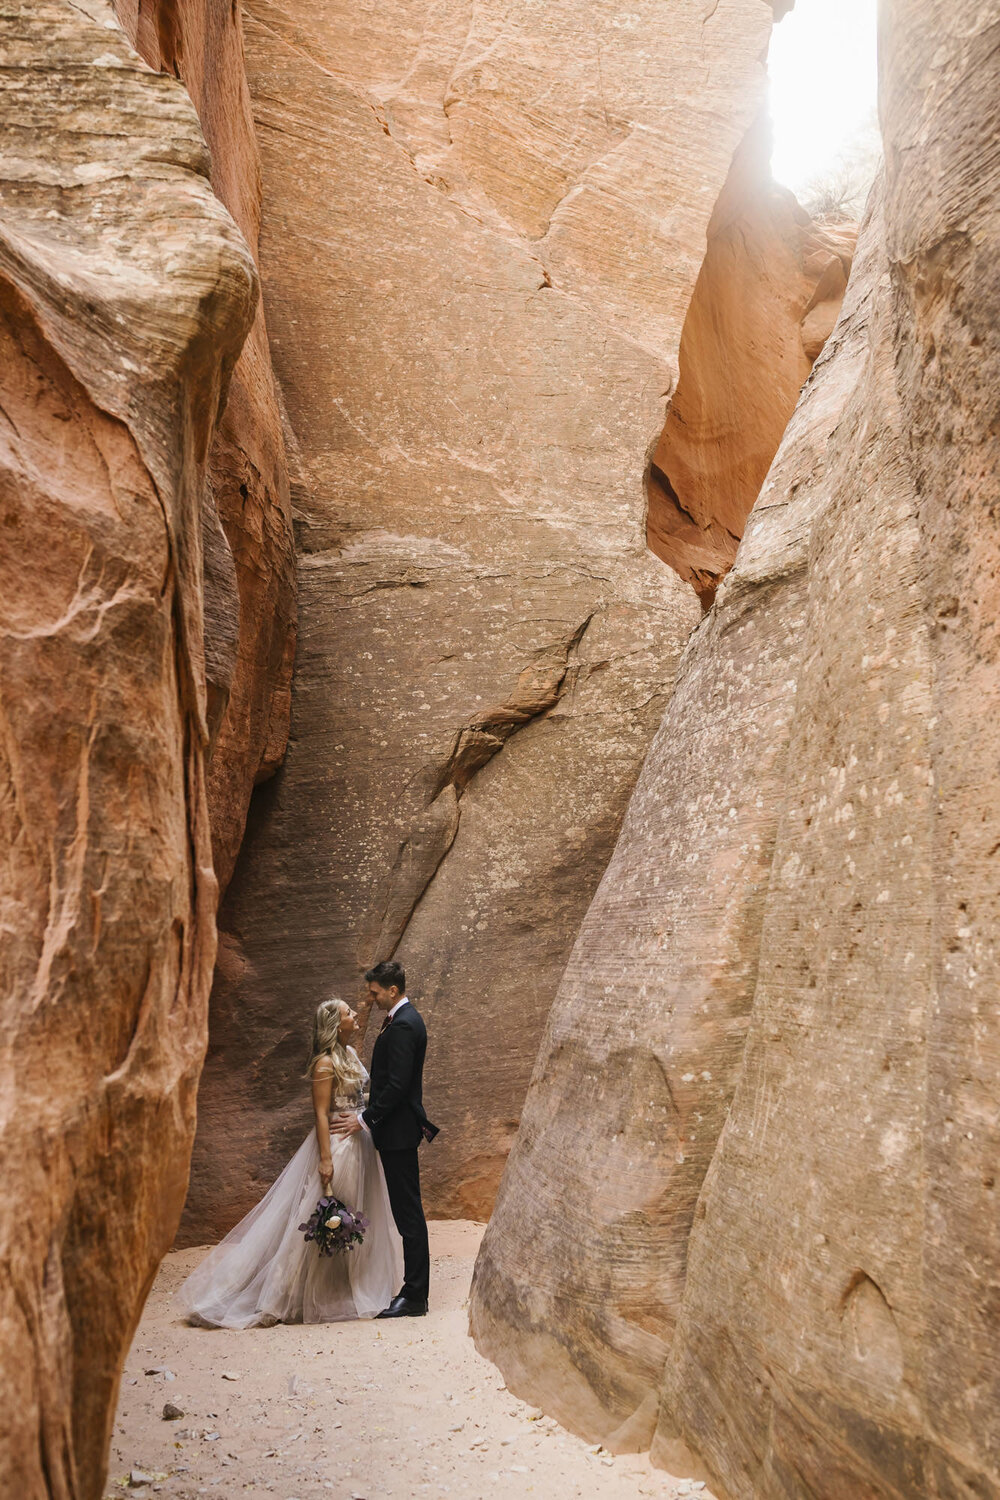 Wedding couple stand together in slot canyon for their portraits in the Utah desert